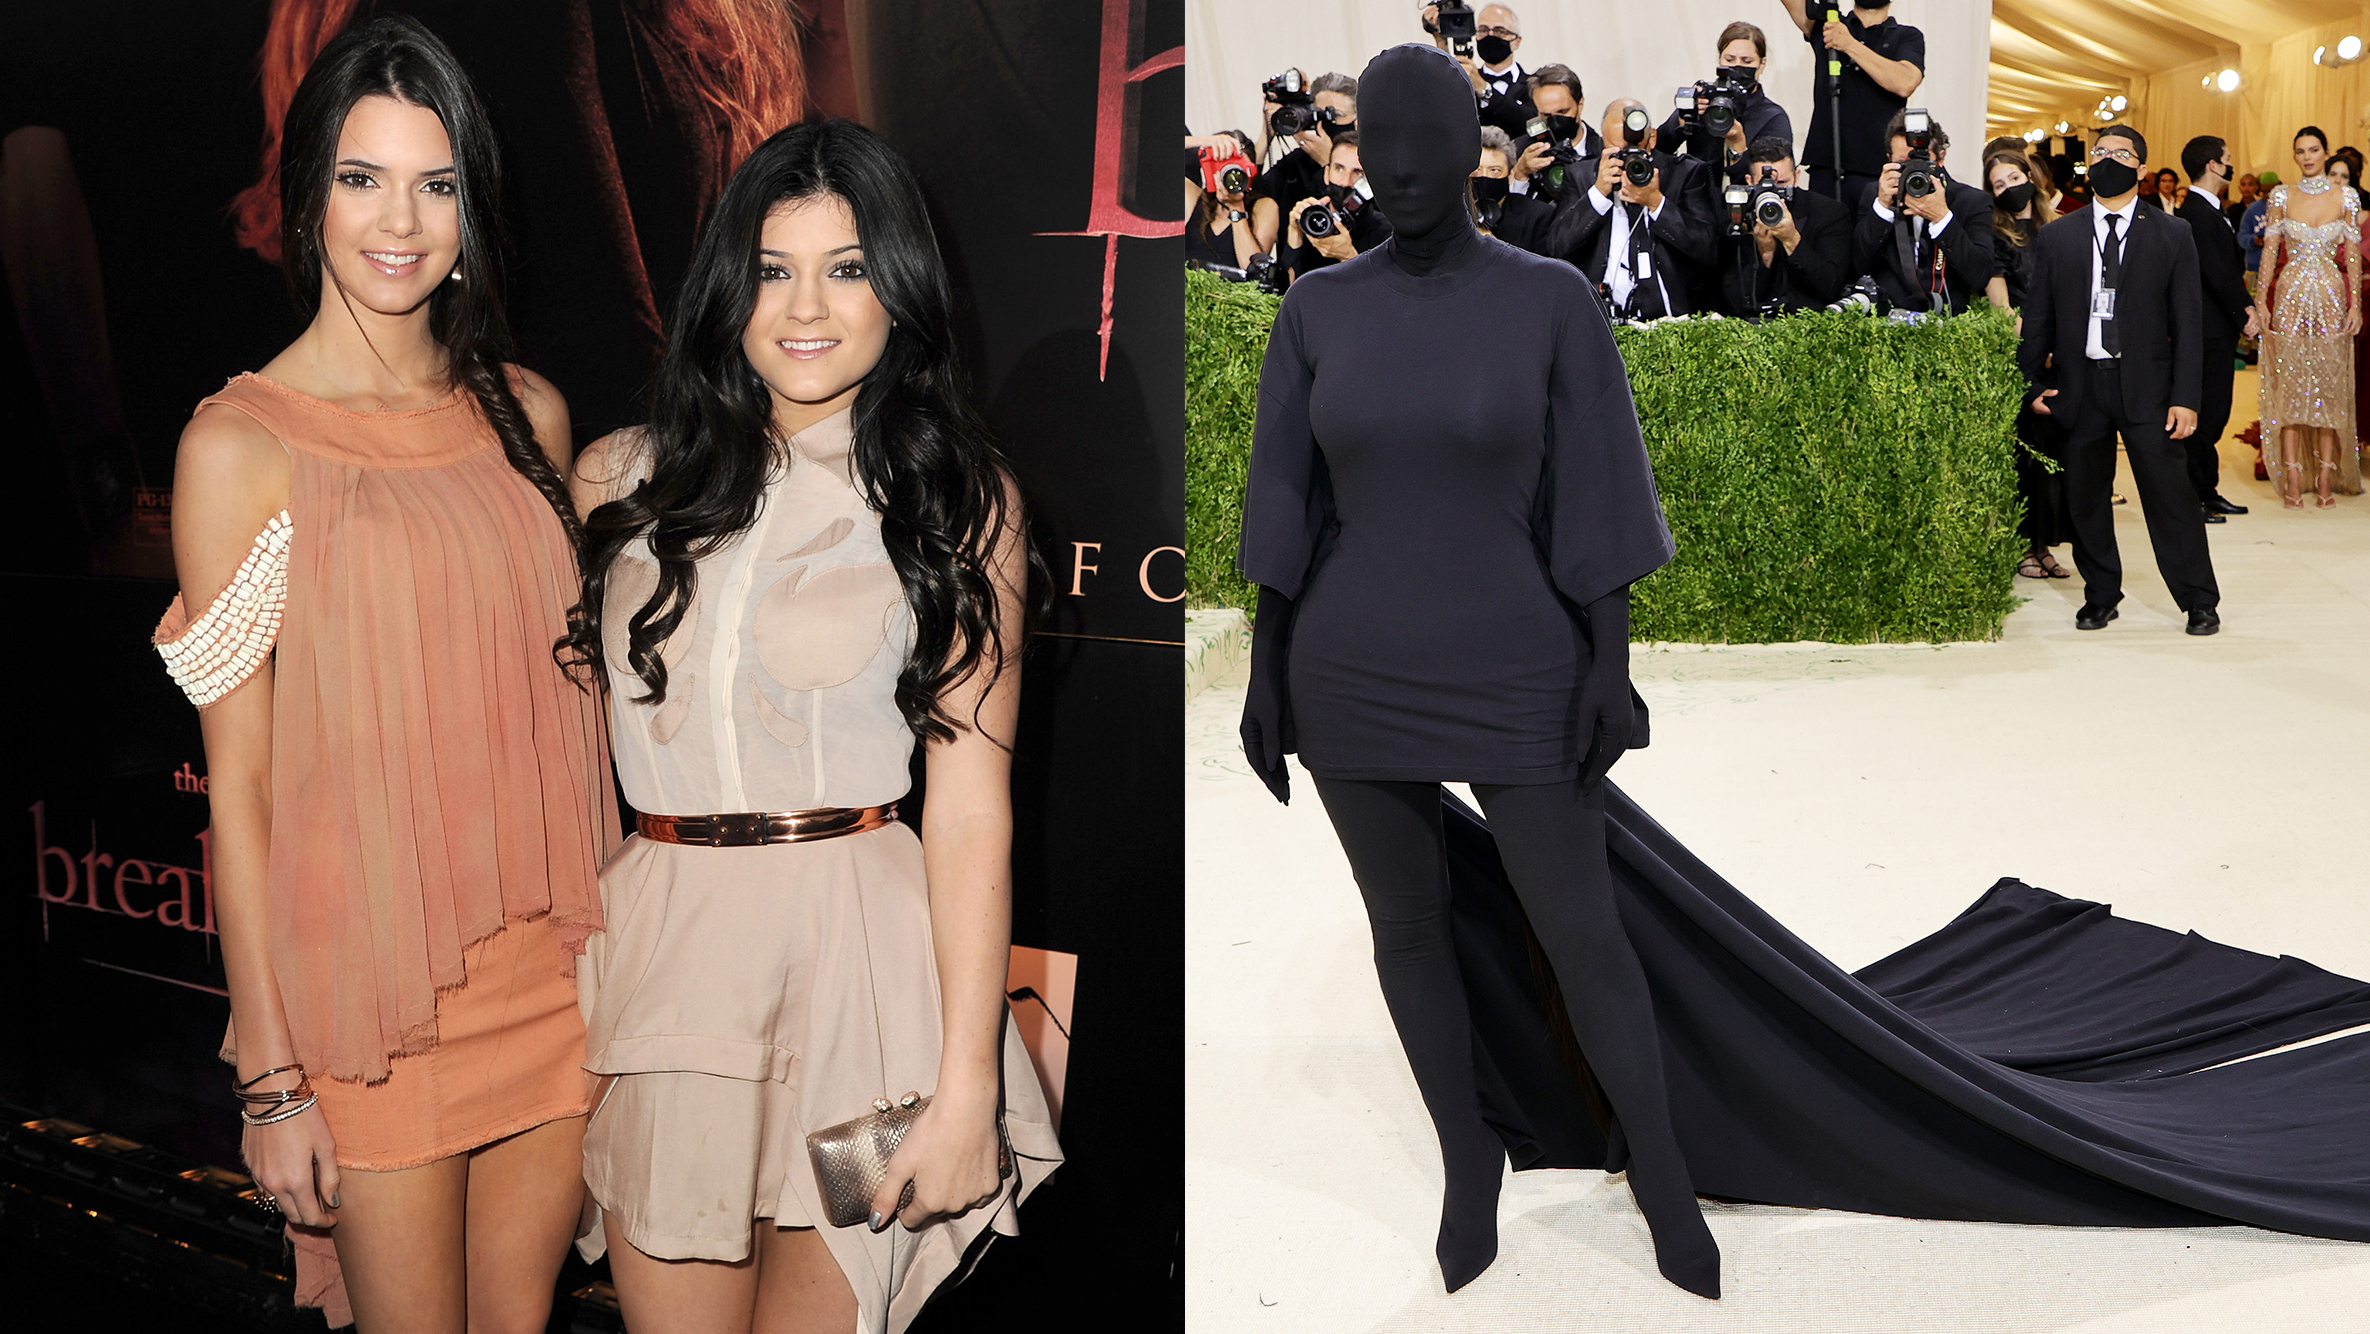 The Wildest Sheer Outfits Celebrities Have Ever Worn